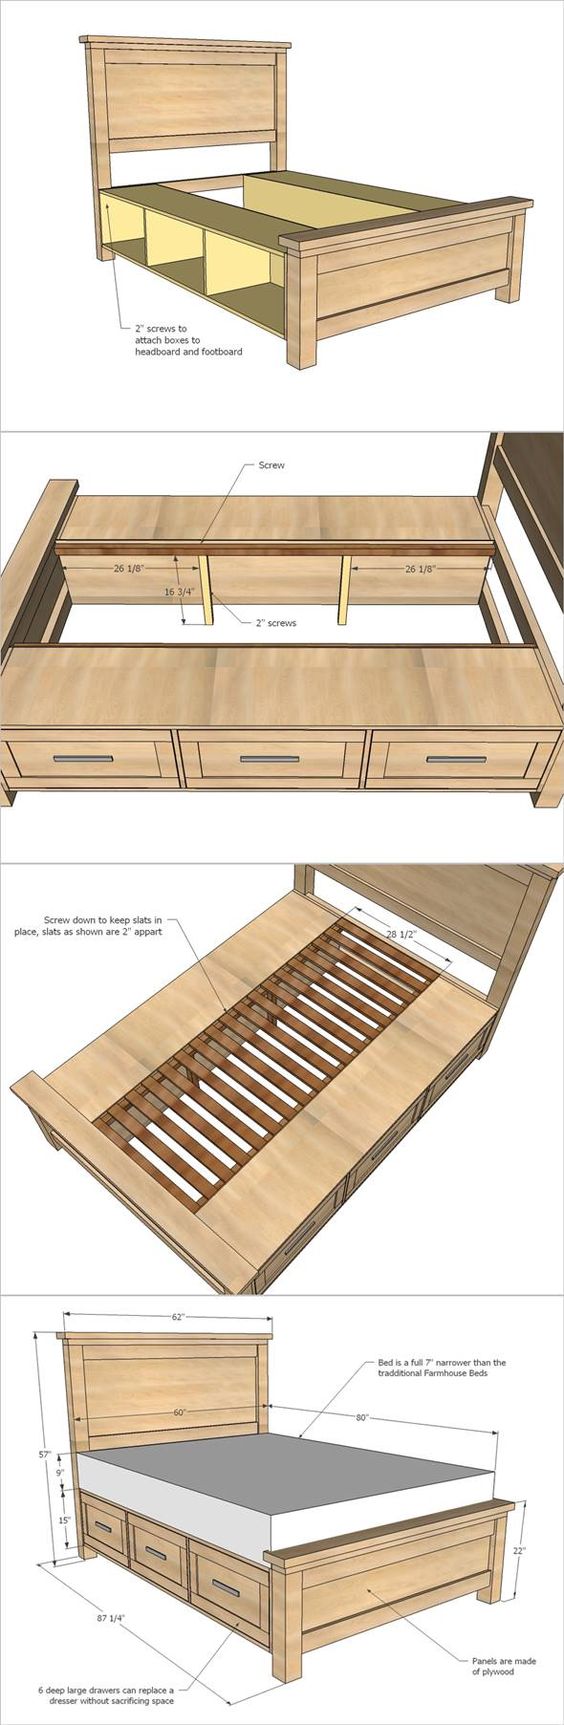 Farmhouse Storage Bed with Drawers. 